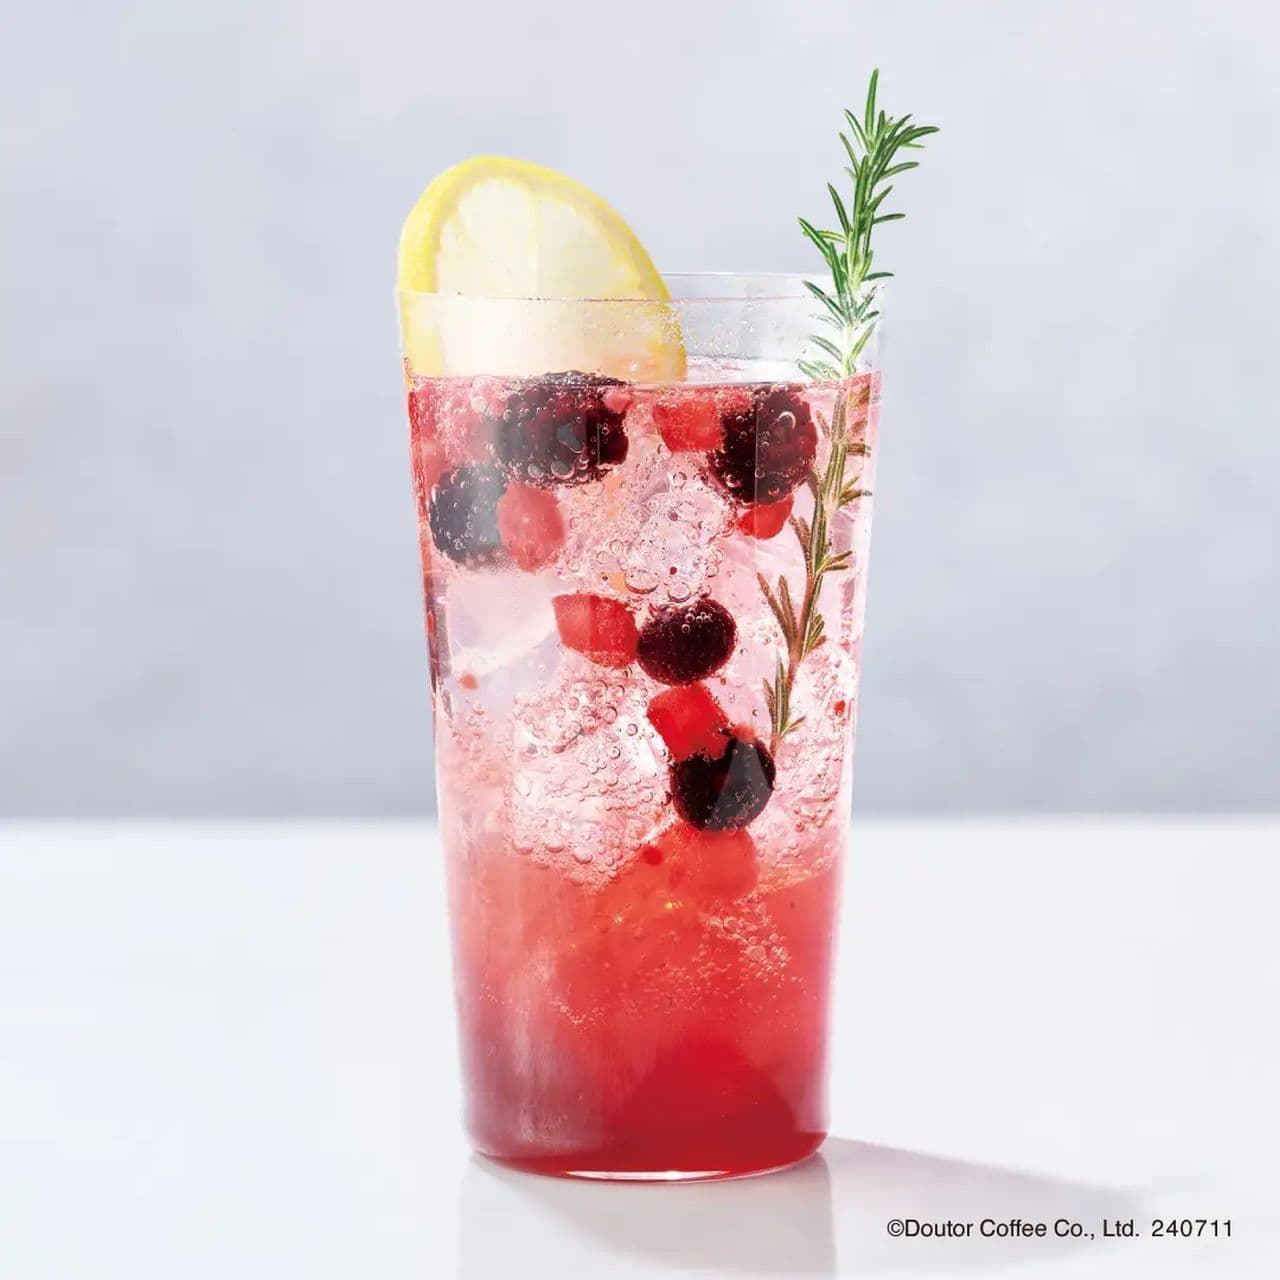 Excelsior Cafe "Rosemary-scented Red Berry Soda